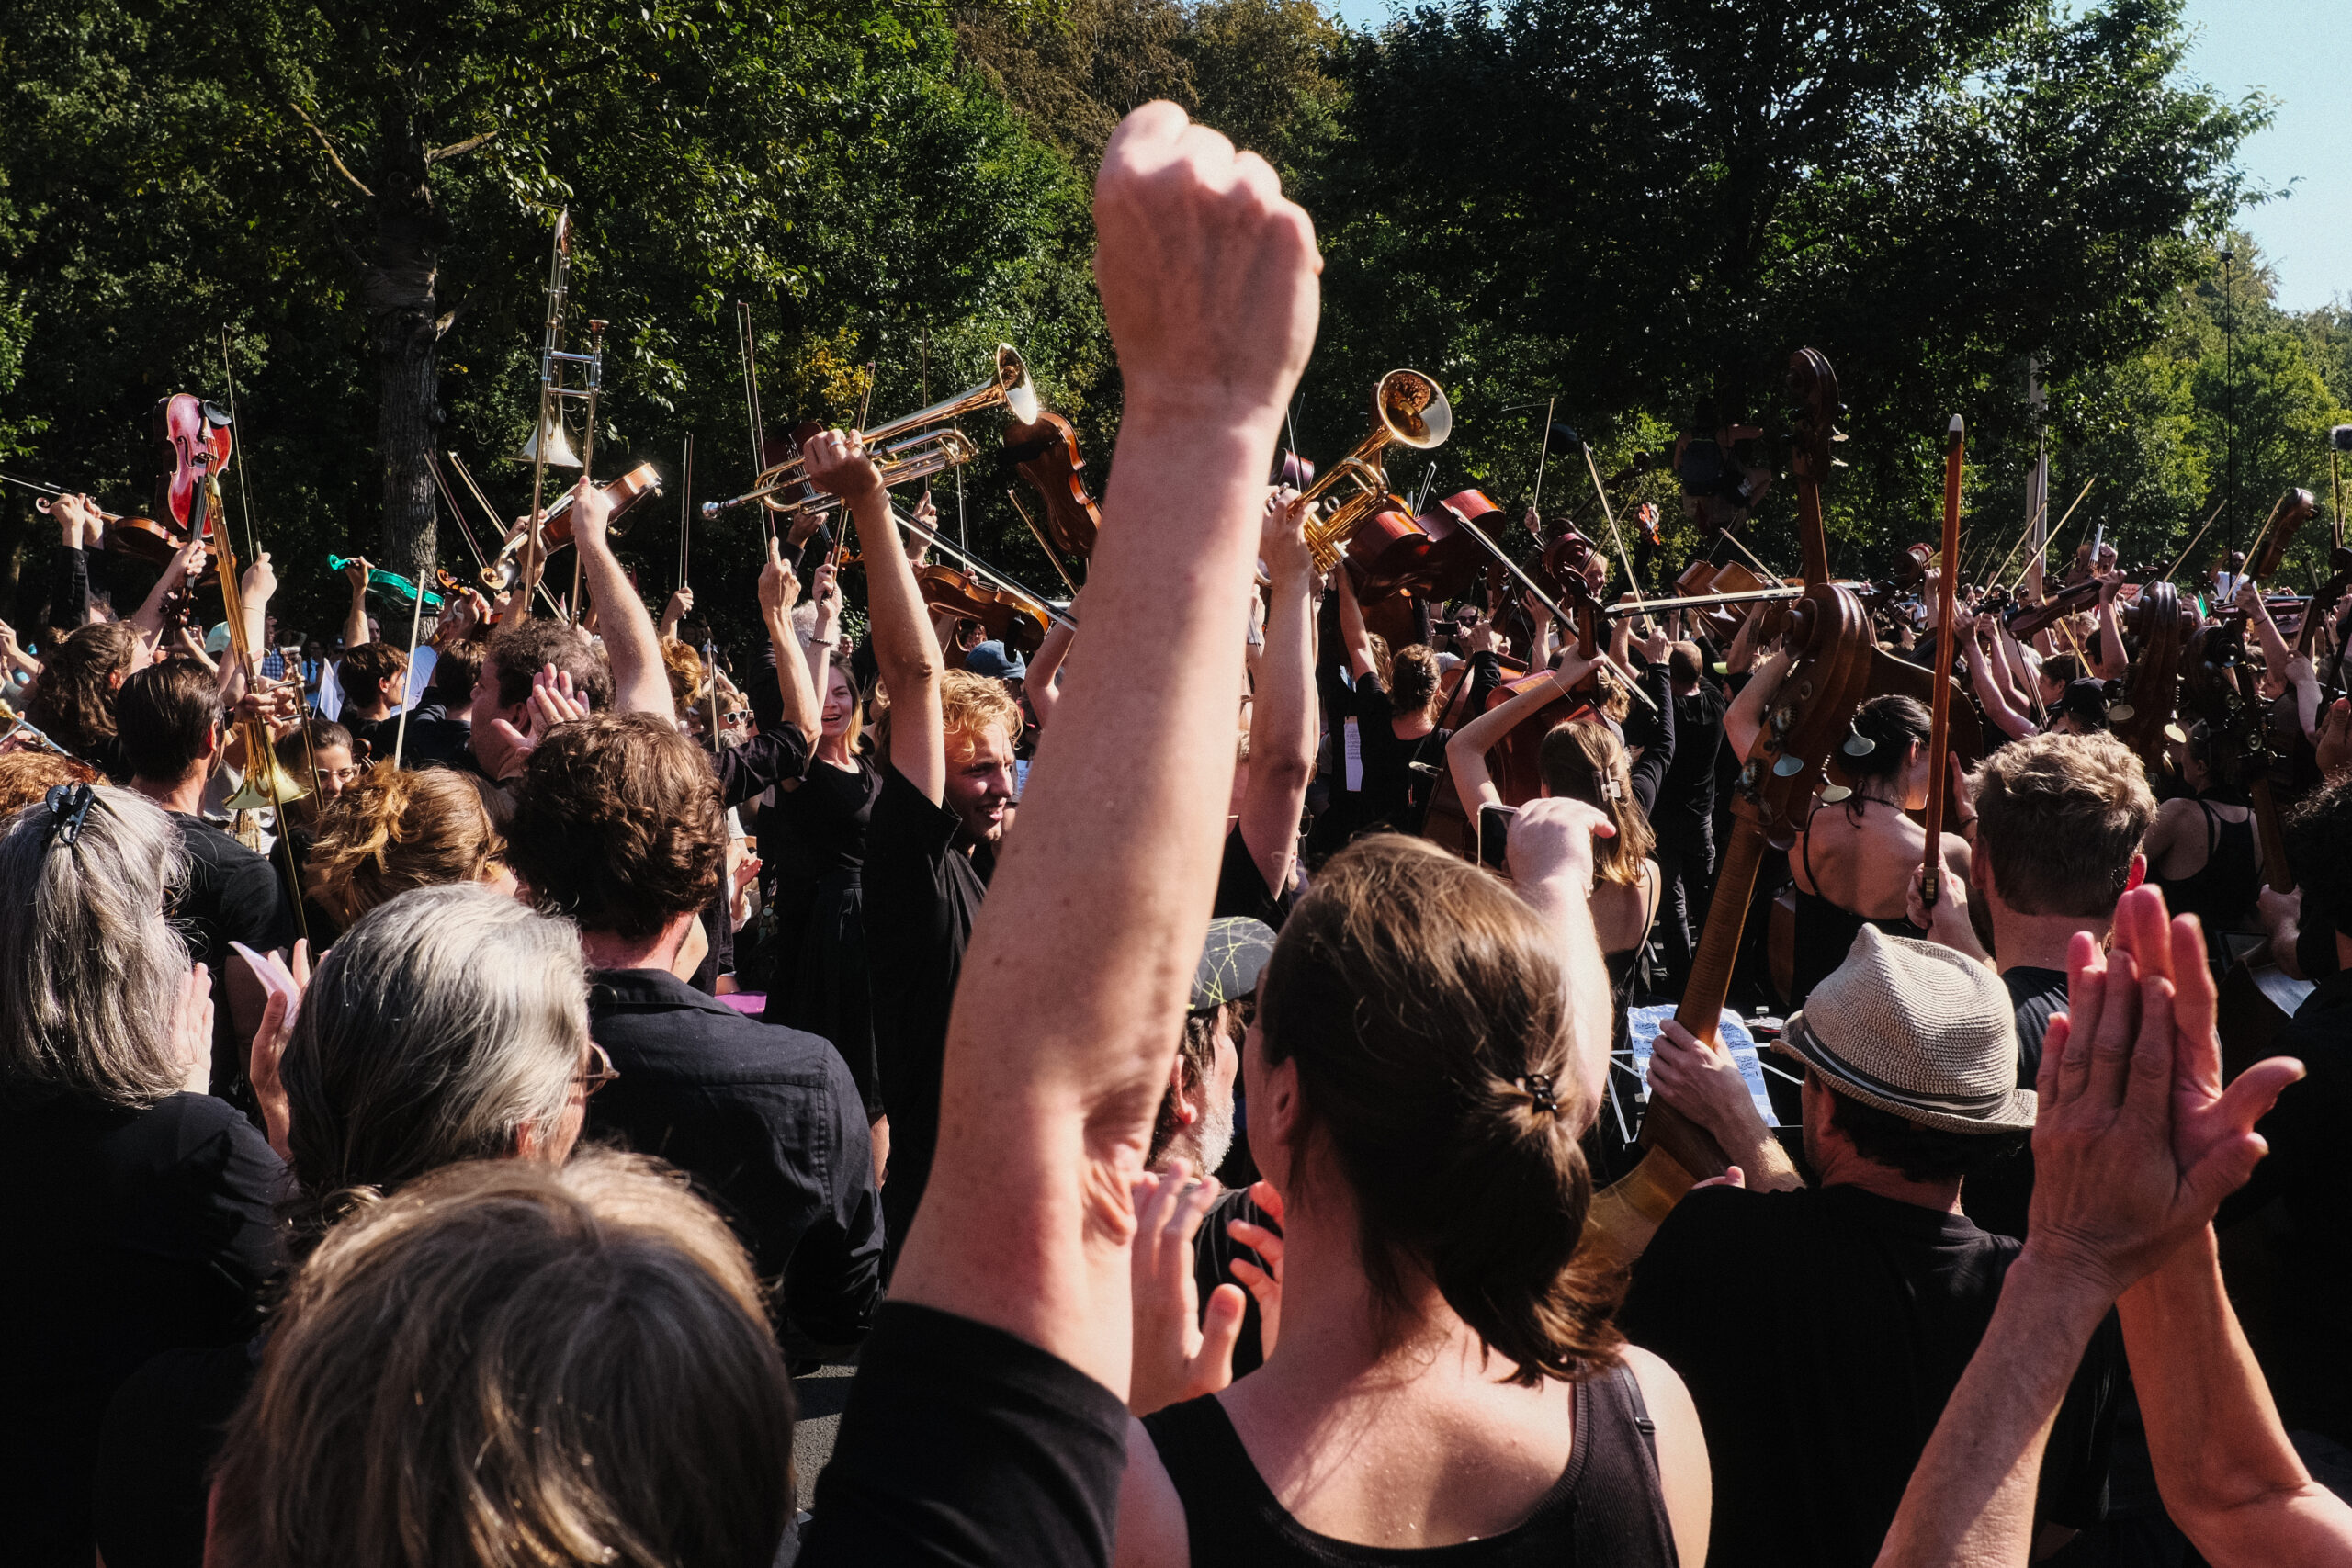 A crowd cheers after the A12 Orchestra performance, as instruments are held in the air